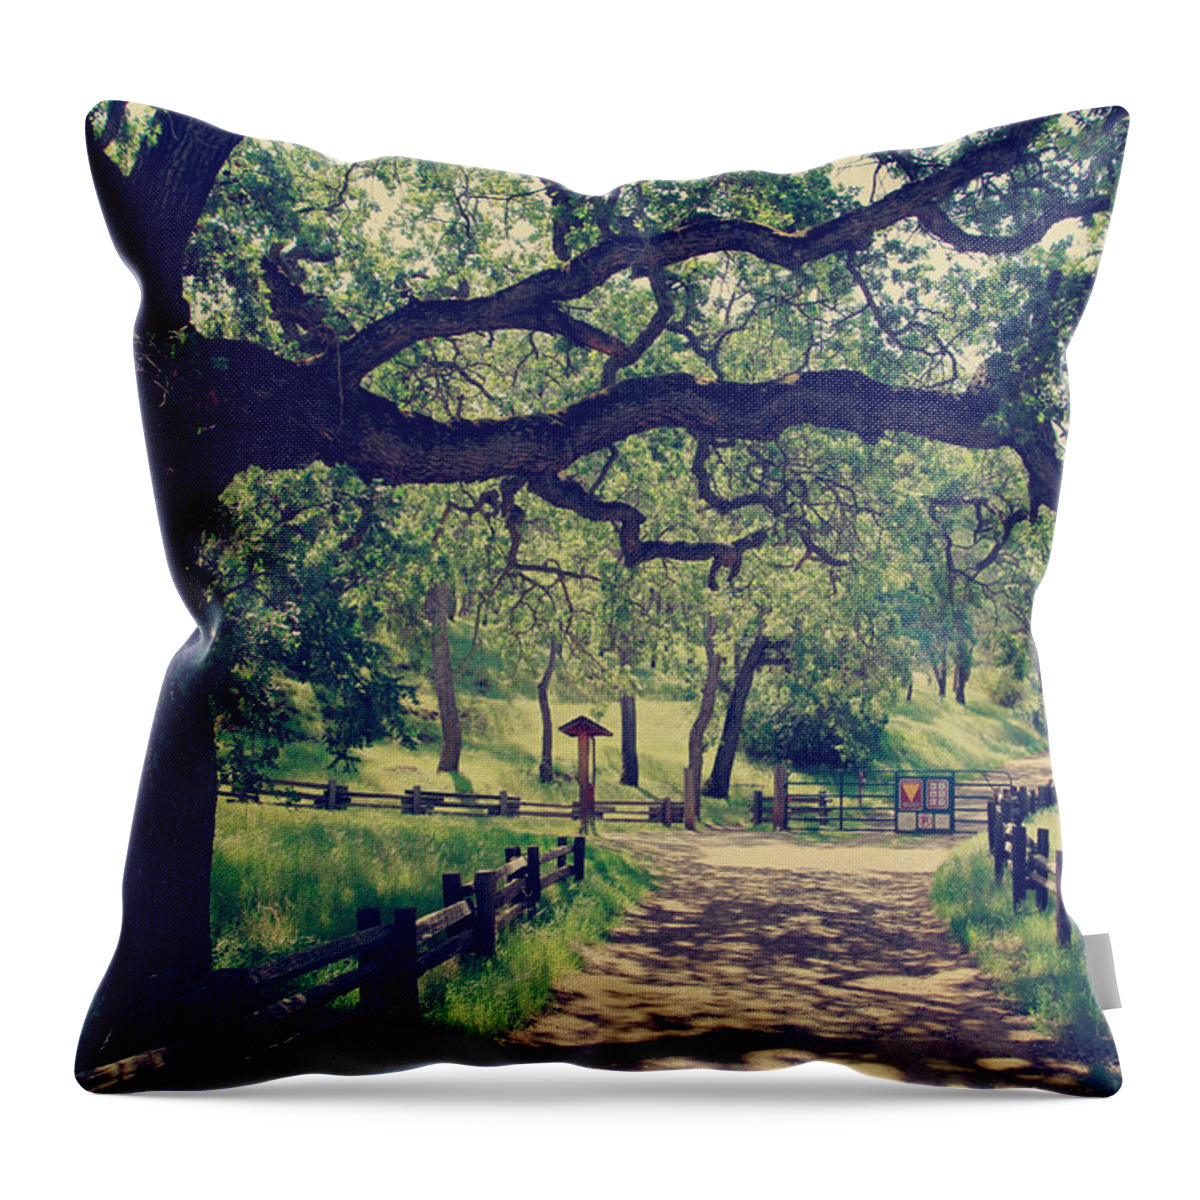 Mt. Diablo State Park Throw Pillow featuring the photograph Welcoming by Laurie Search